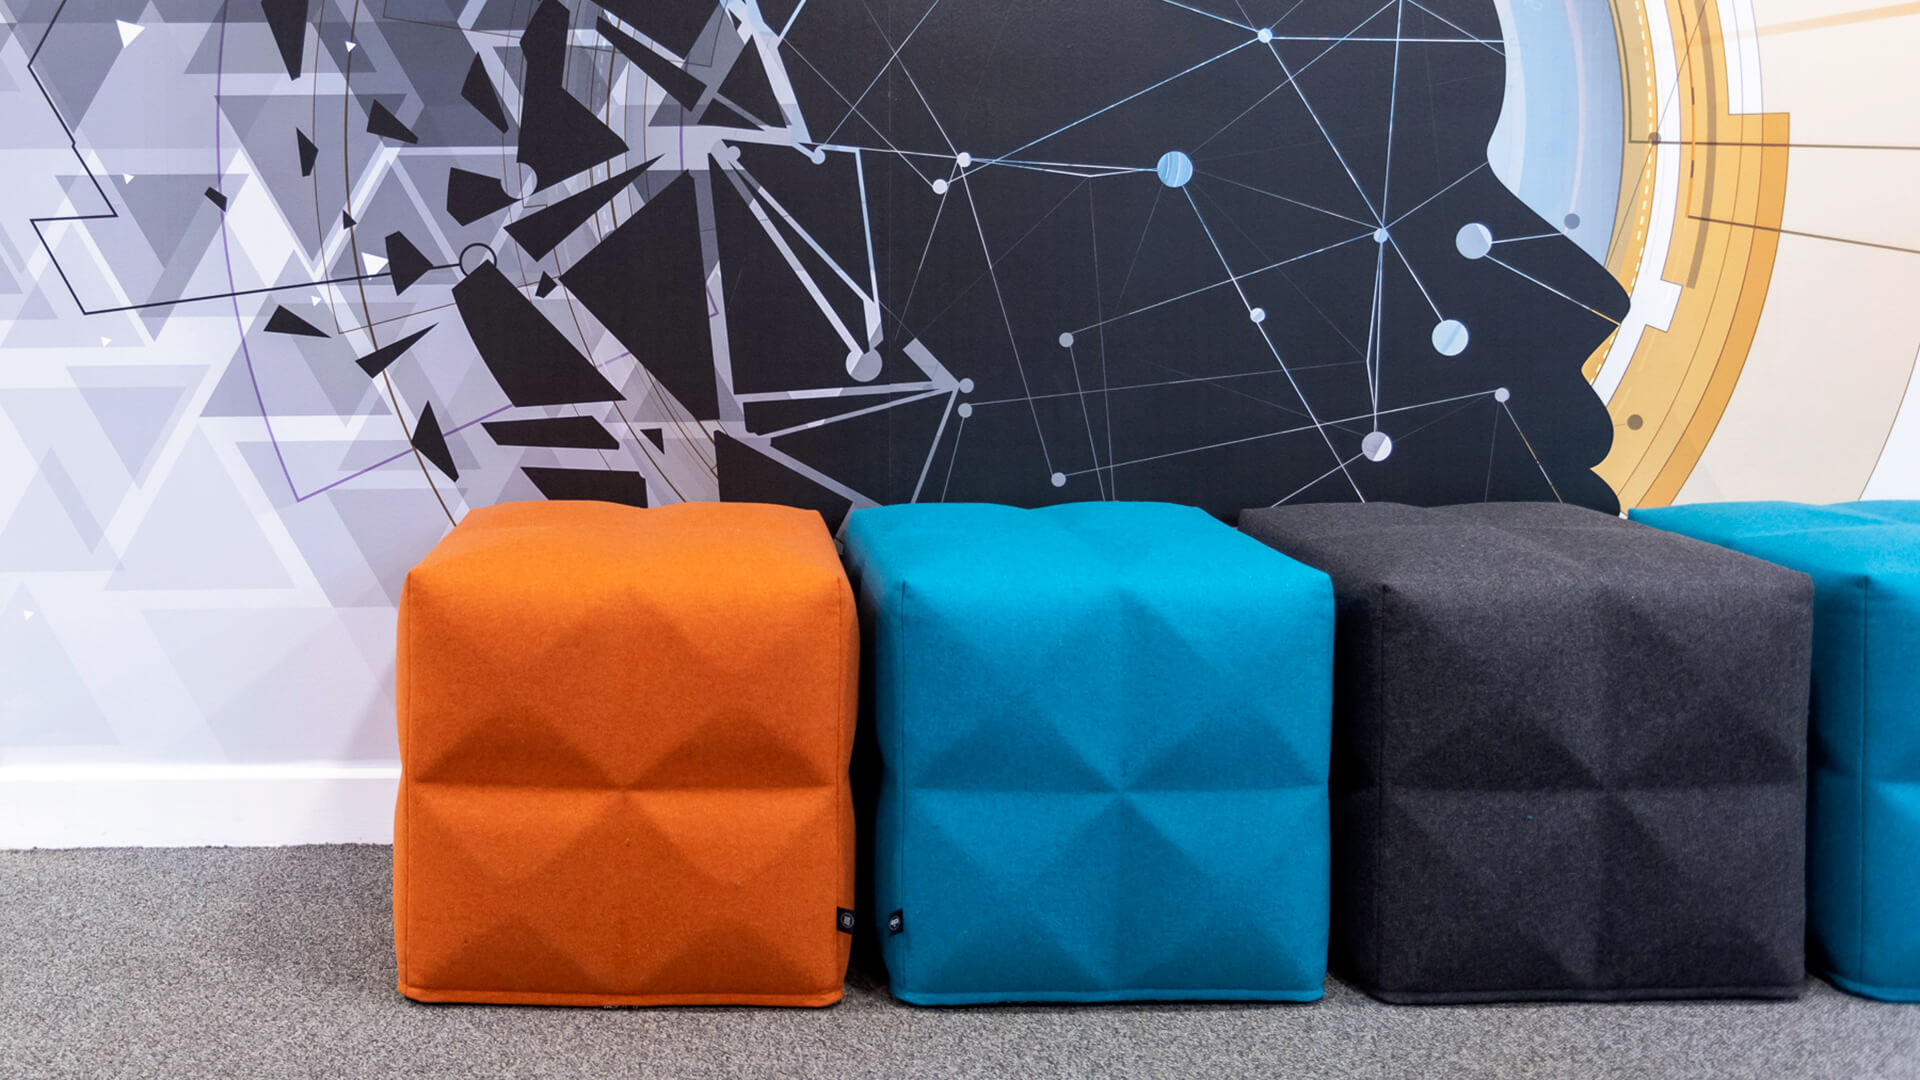 Detail of geometric cube seating in shades of orange, blue and grey